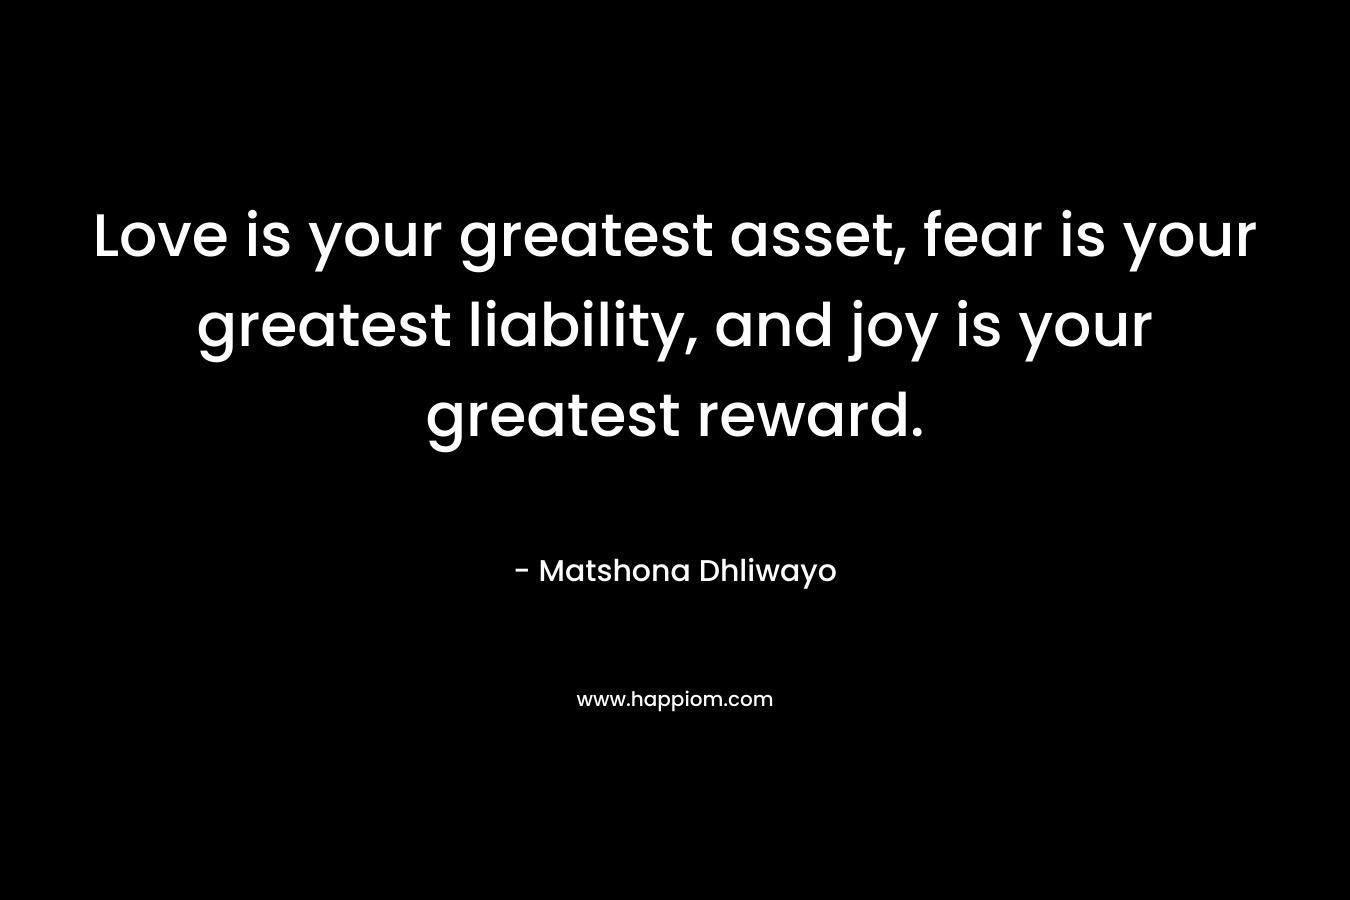 Love is your greatest asset, fear is your greatest liability, and joy is your greatest reward.